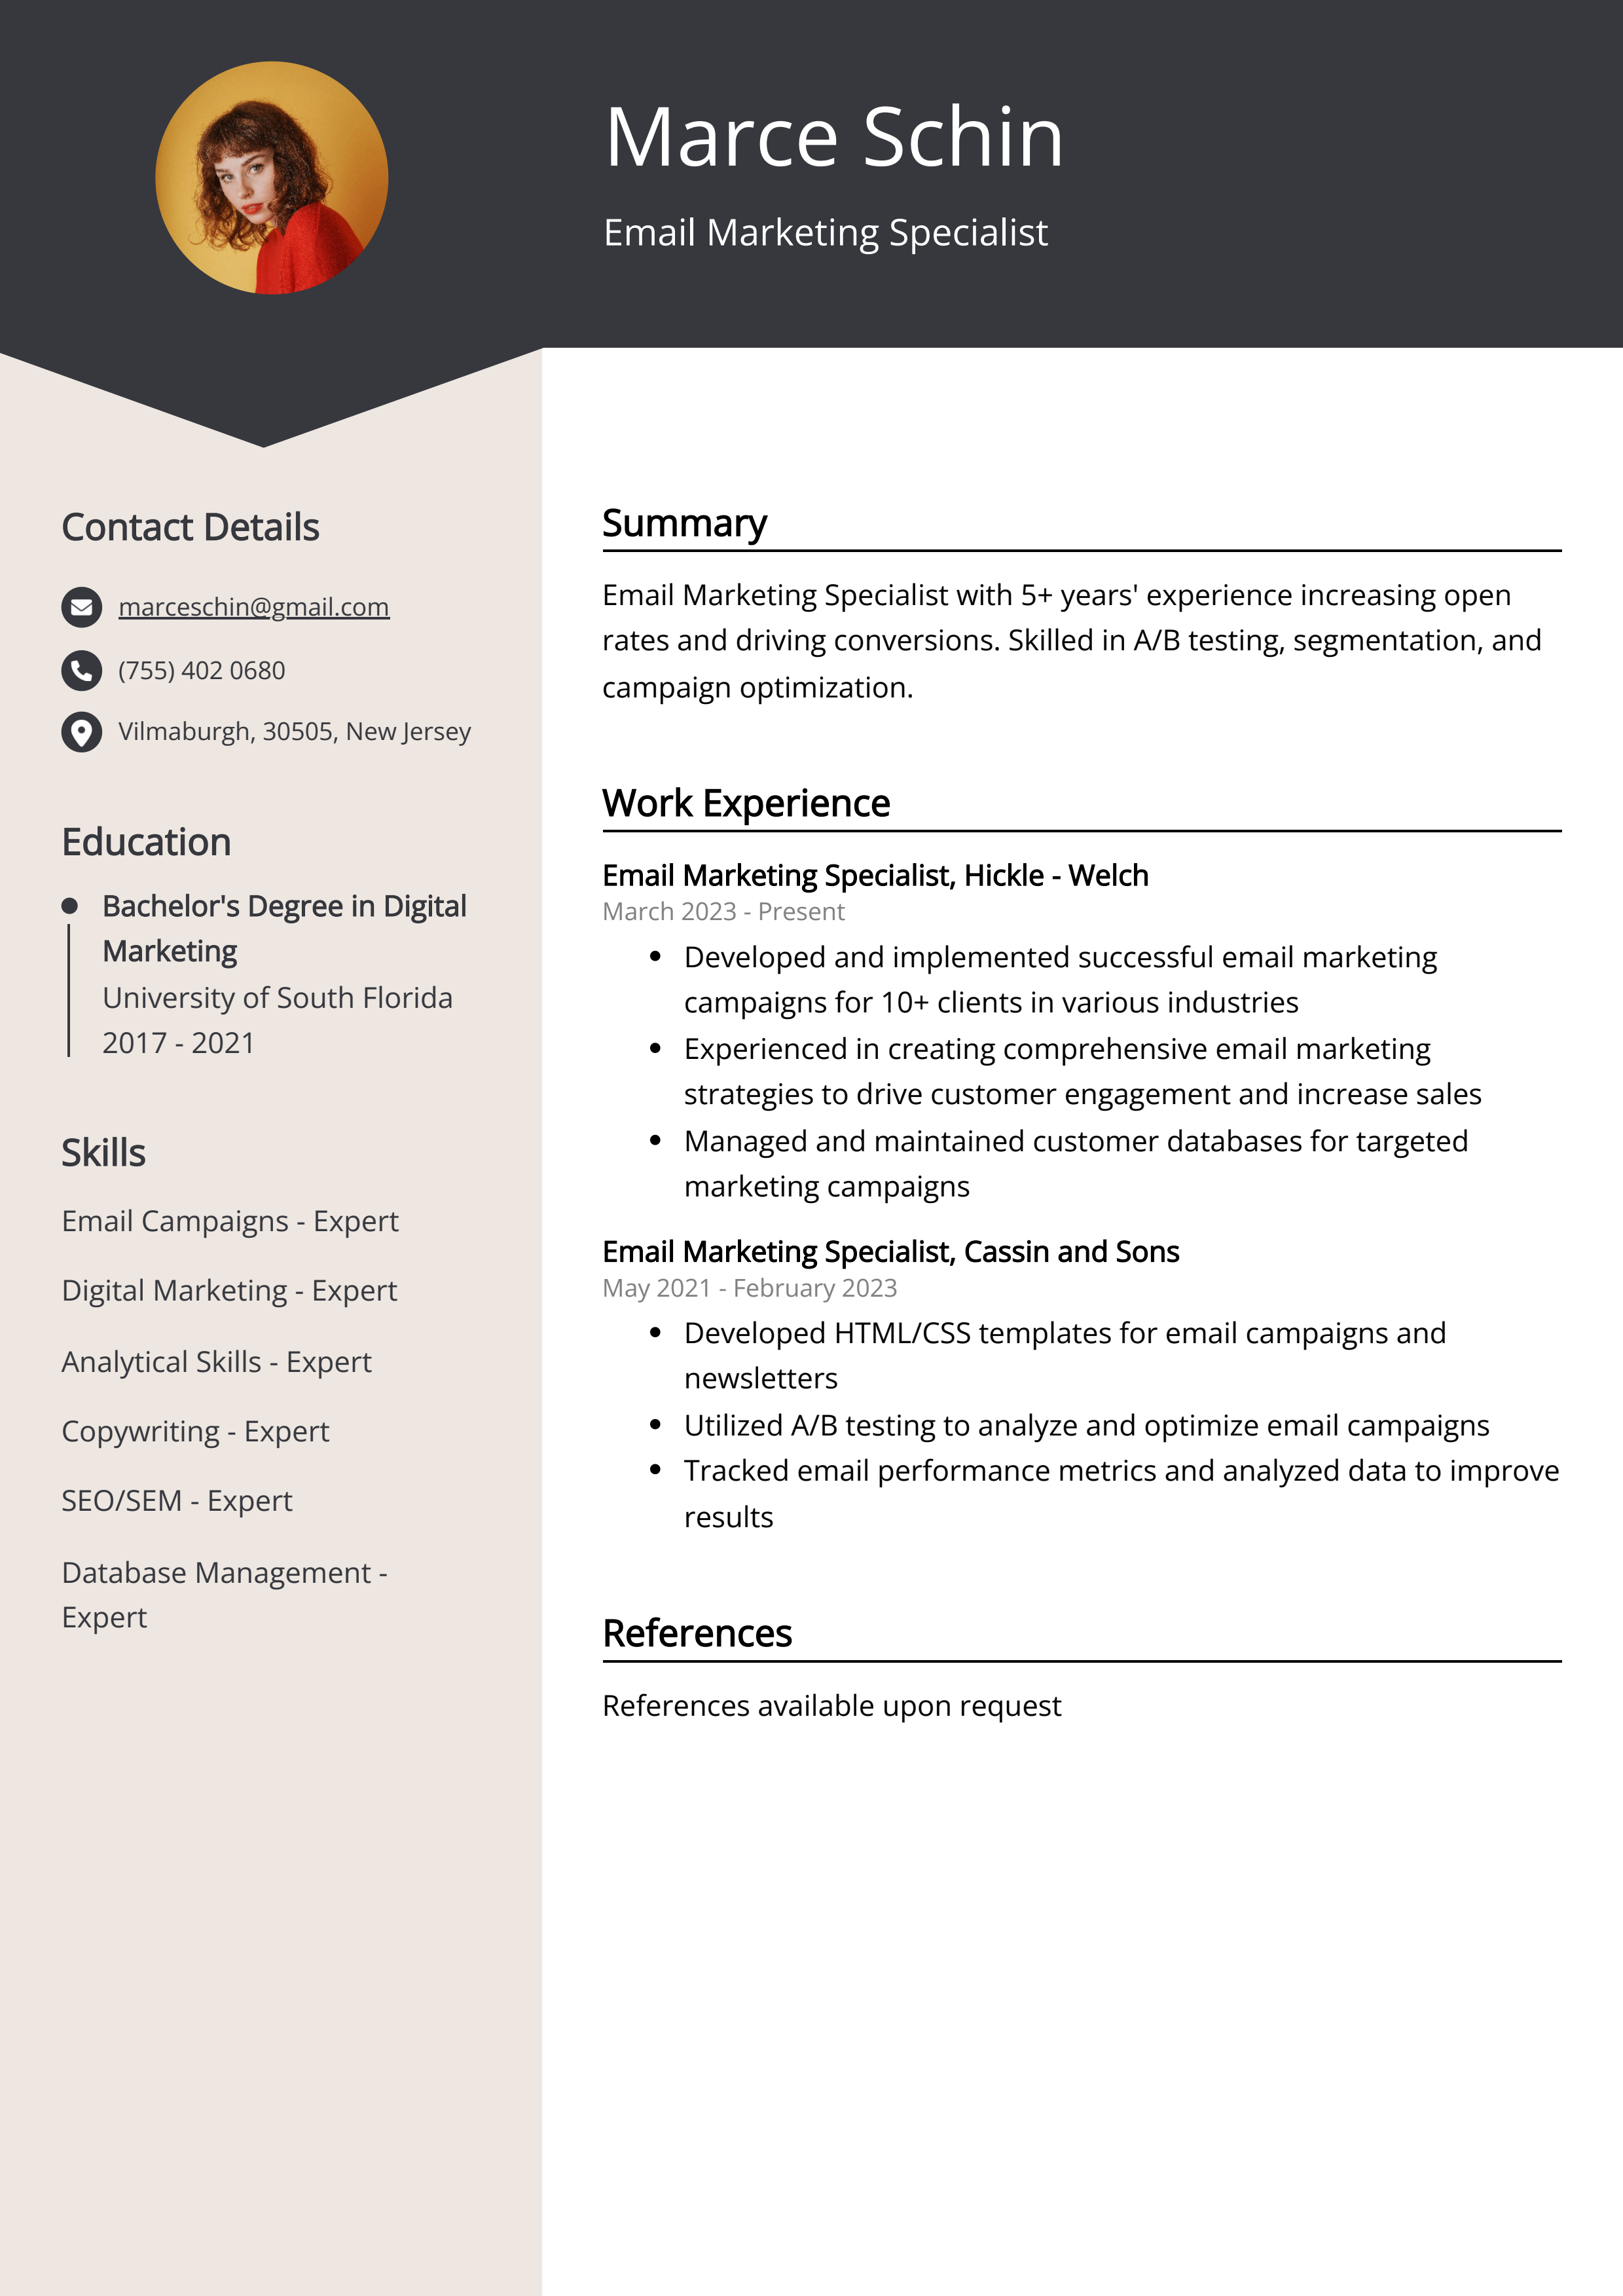 Email Marketing Specialist CV Example